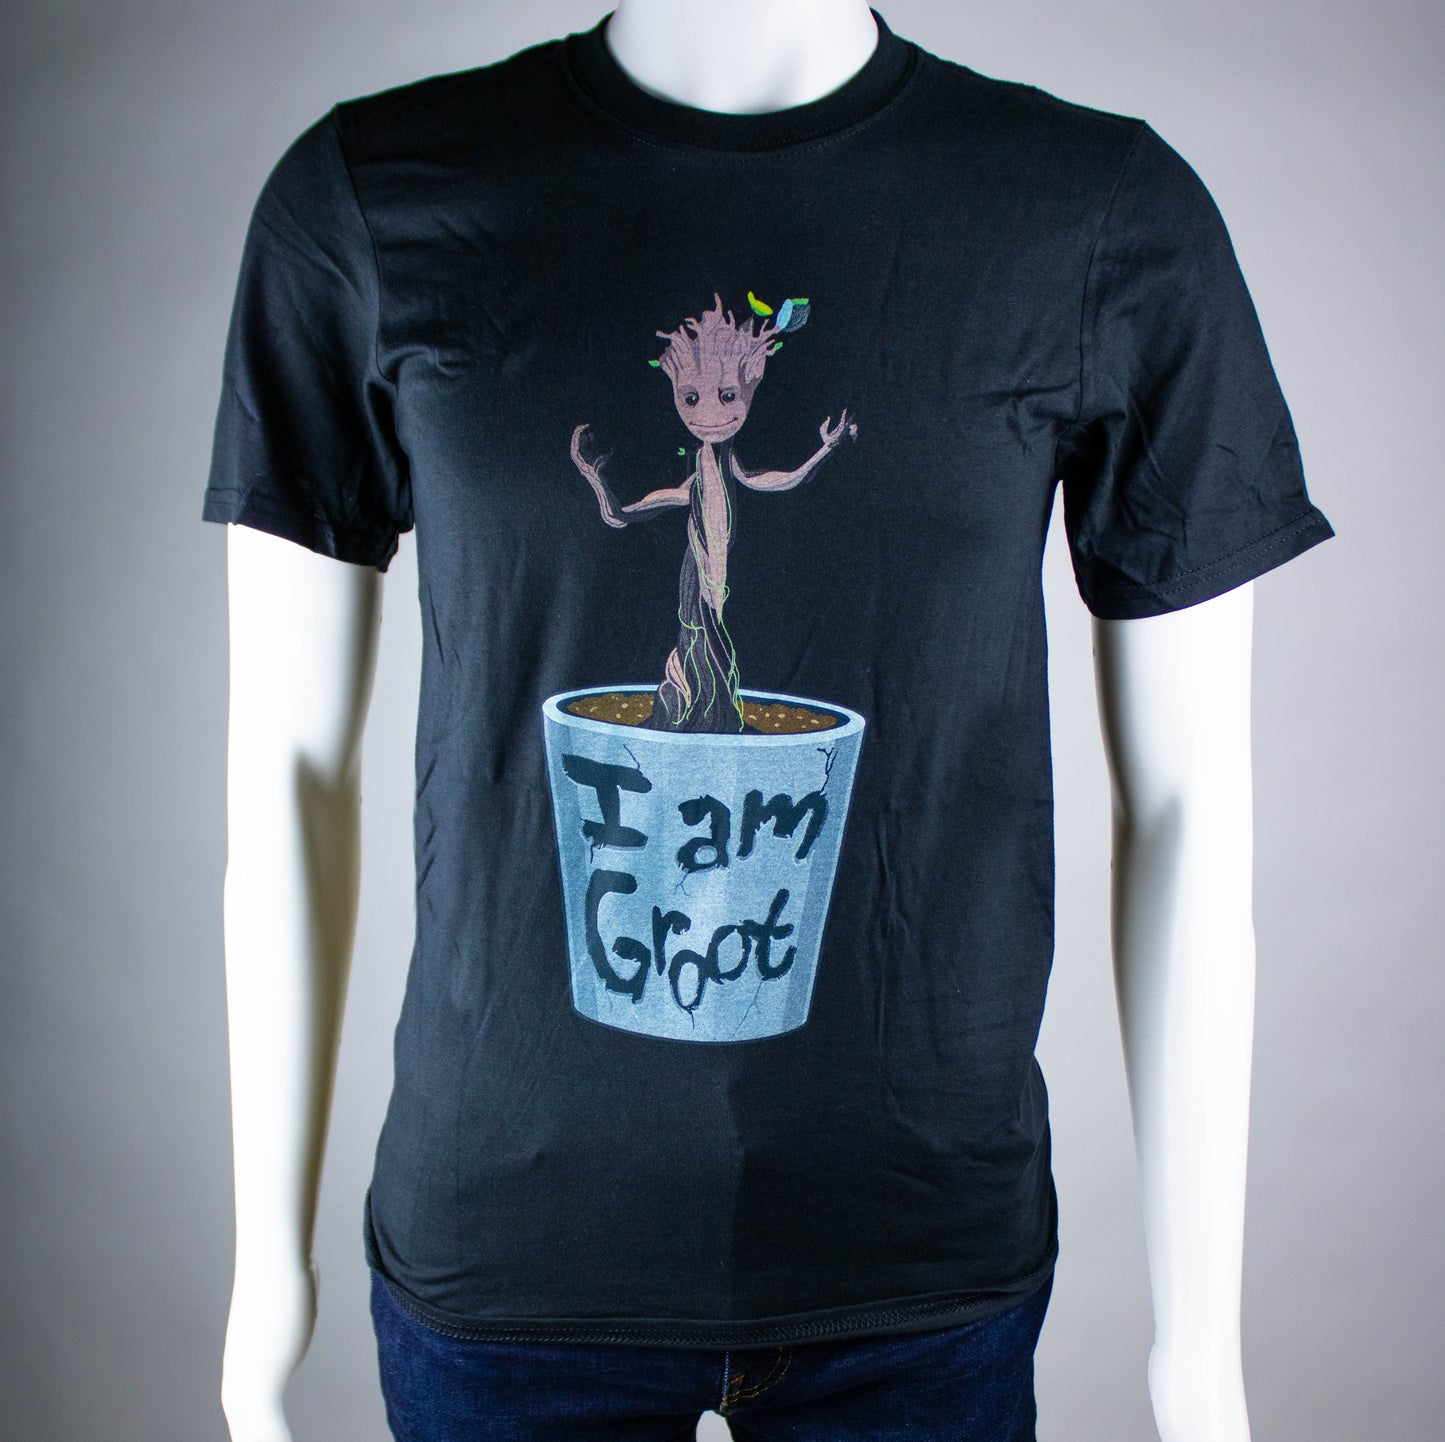 *Clearance* Dancing Baby Groot (Marvel) Unisex Shirt